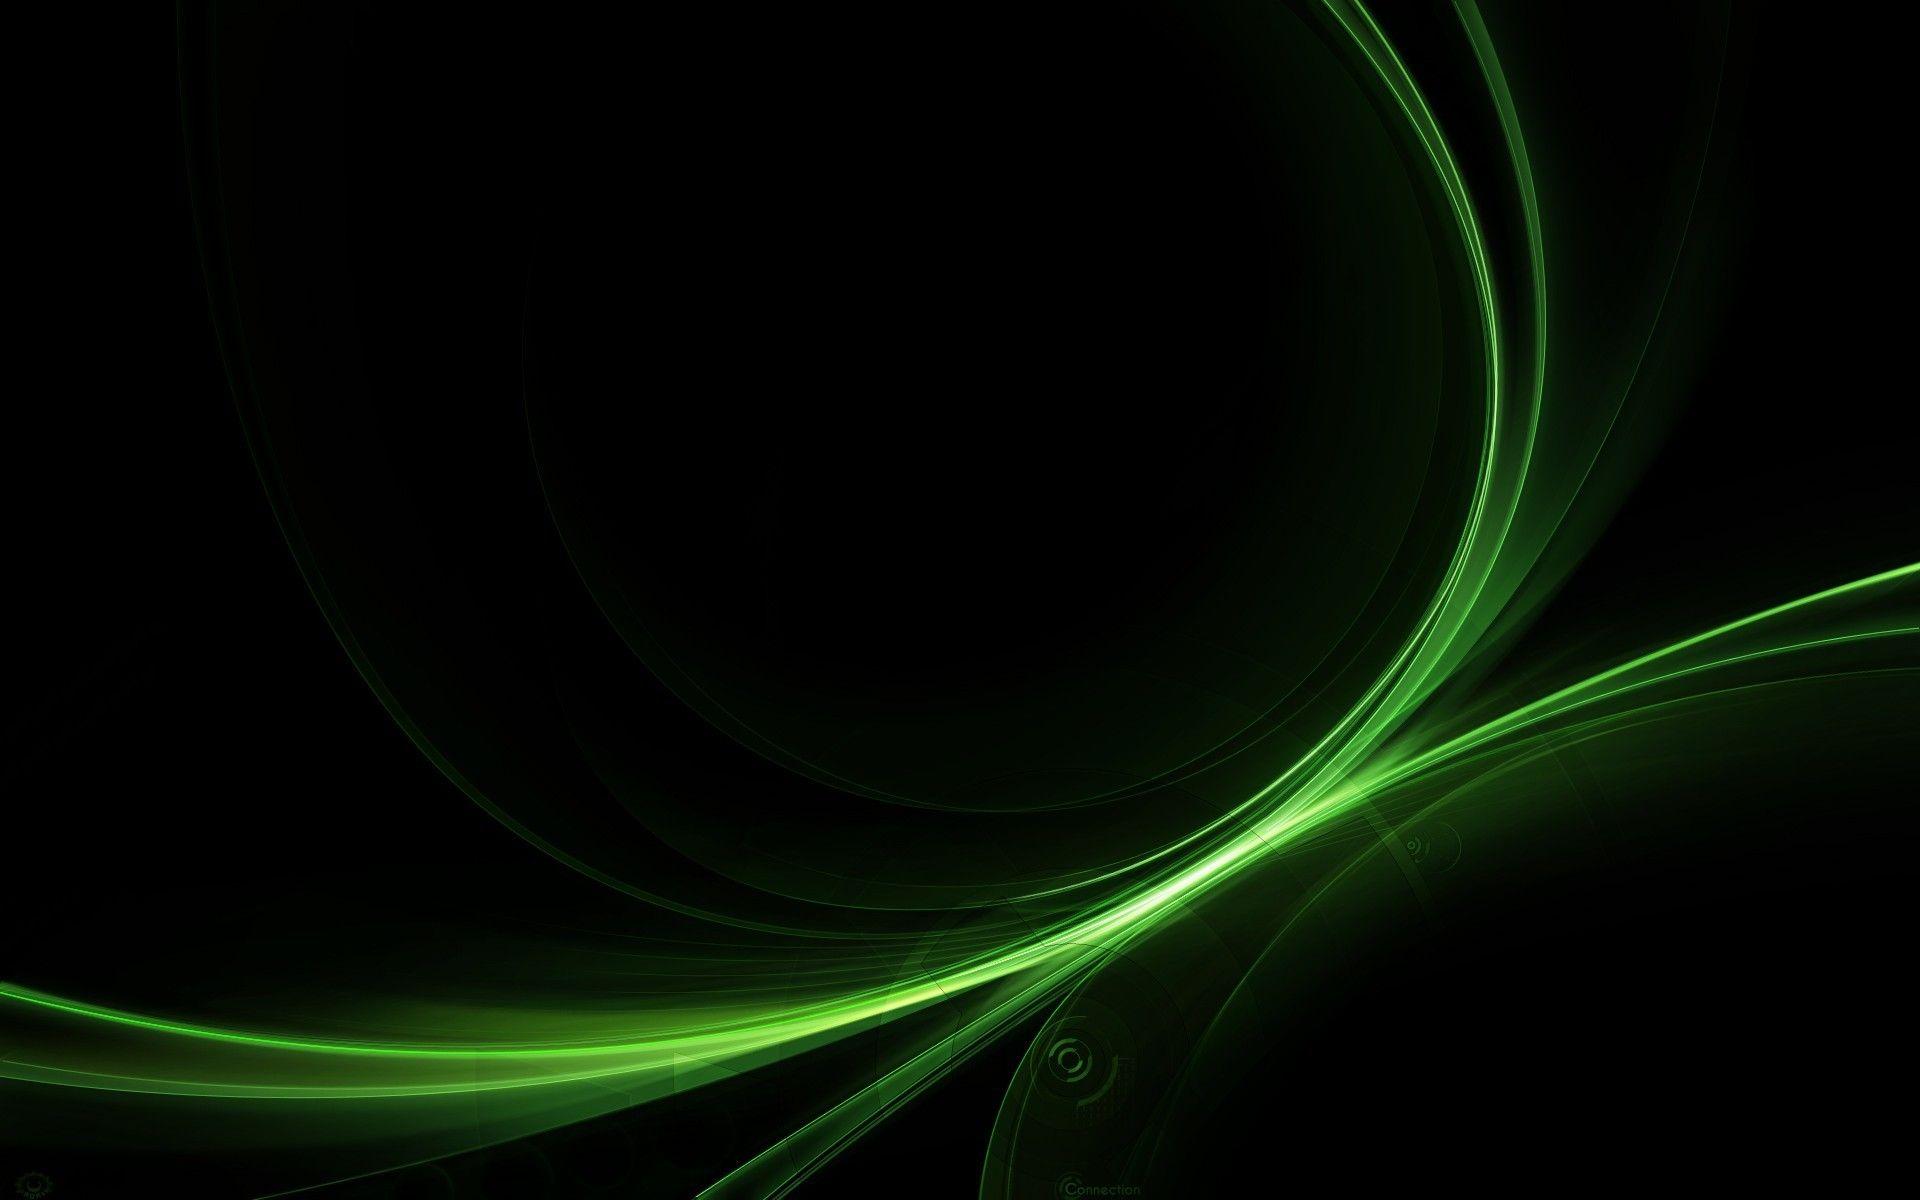 Black and Green Abstract Wallpapers - Top Free Black and Green Abstract